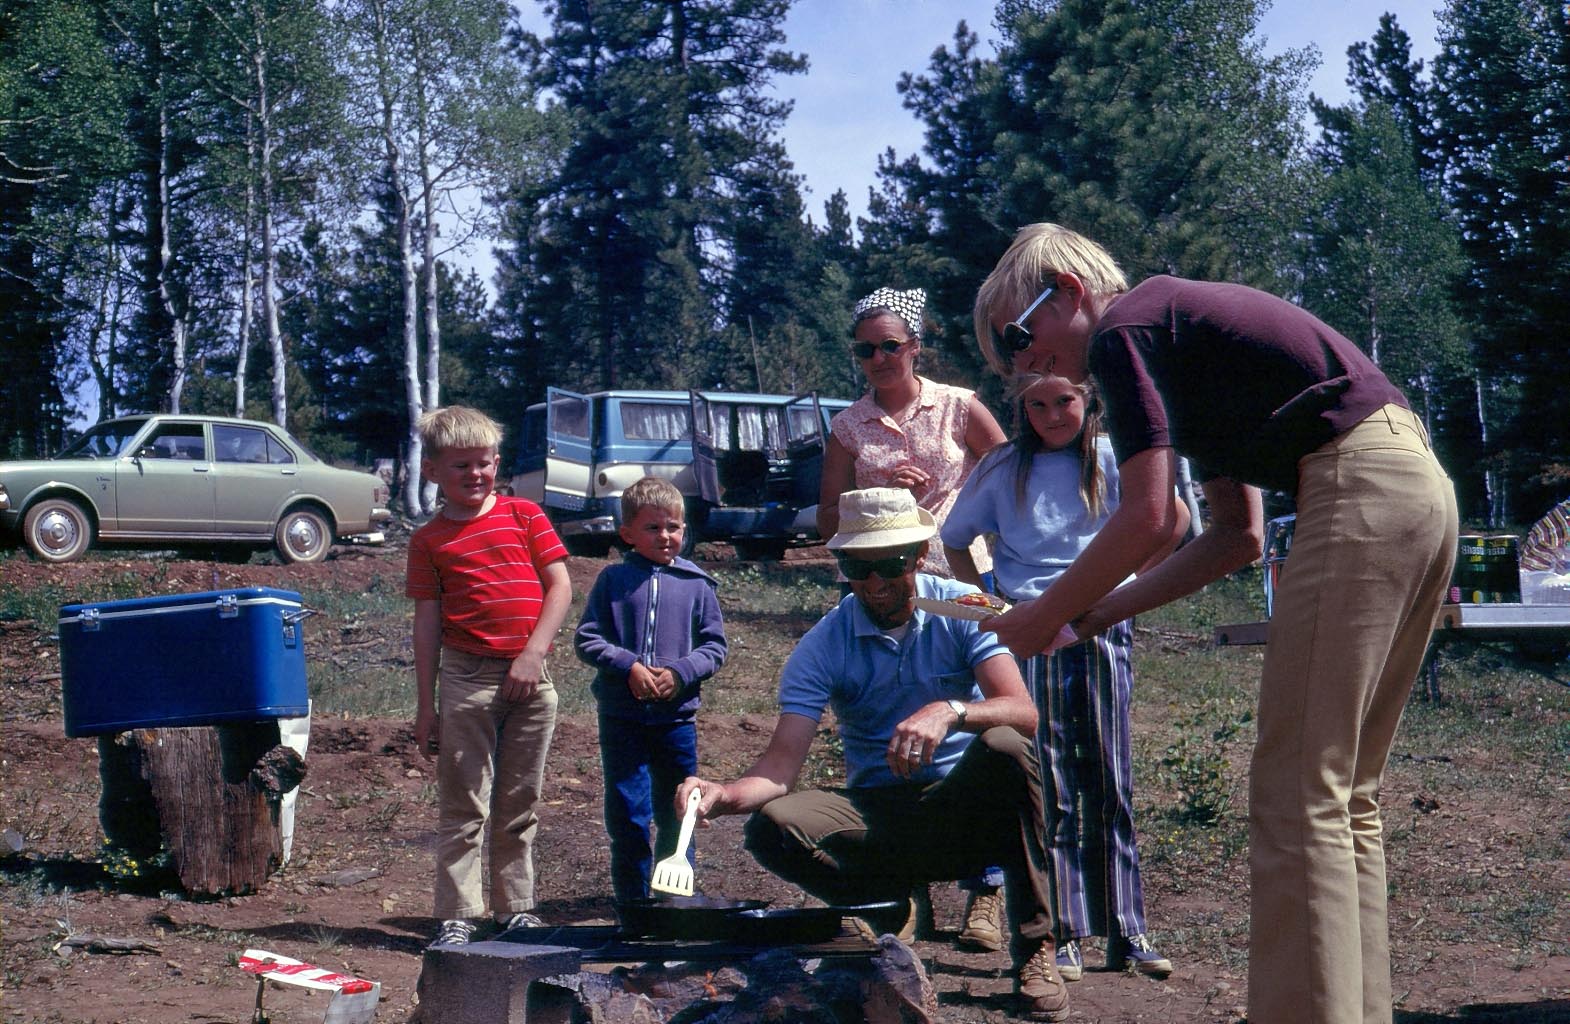 There I am with my scraggly hair and my cool dark glasses. My little brother is far left, and the other peeps are family friends from those days. In the distance is our '71 Toyota and the mid '60s Dodge van belonging to the our friends. 

I'm amazed I was even in the picture. I must have been in a good mood that day.